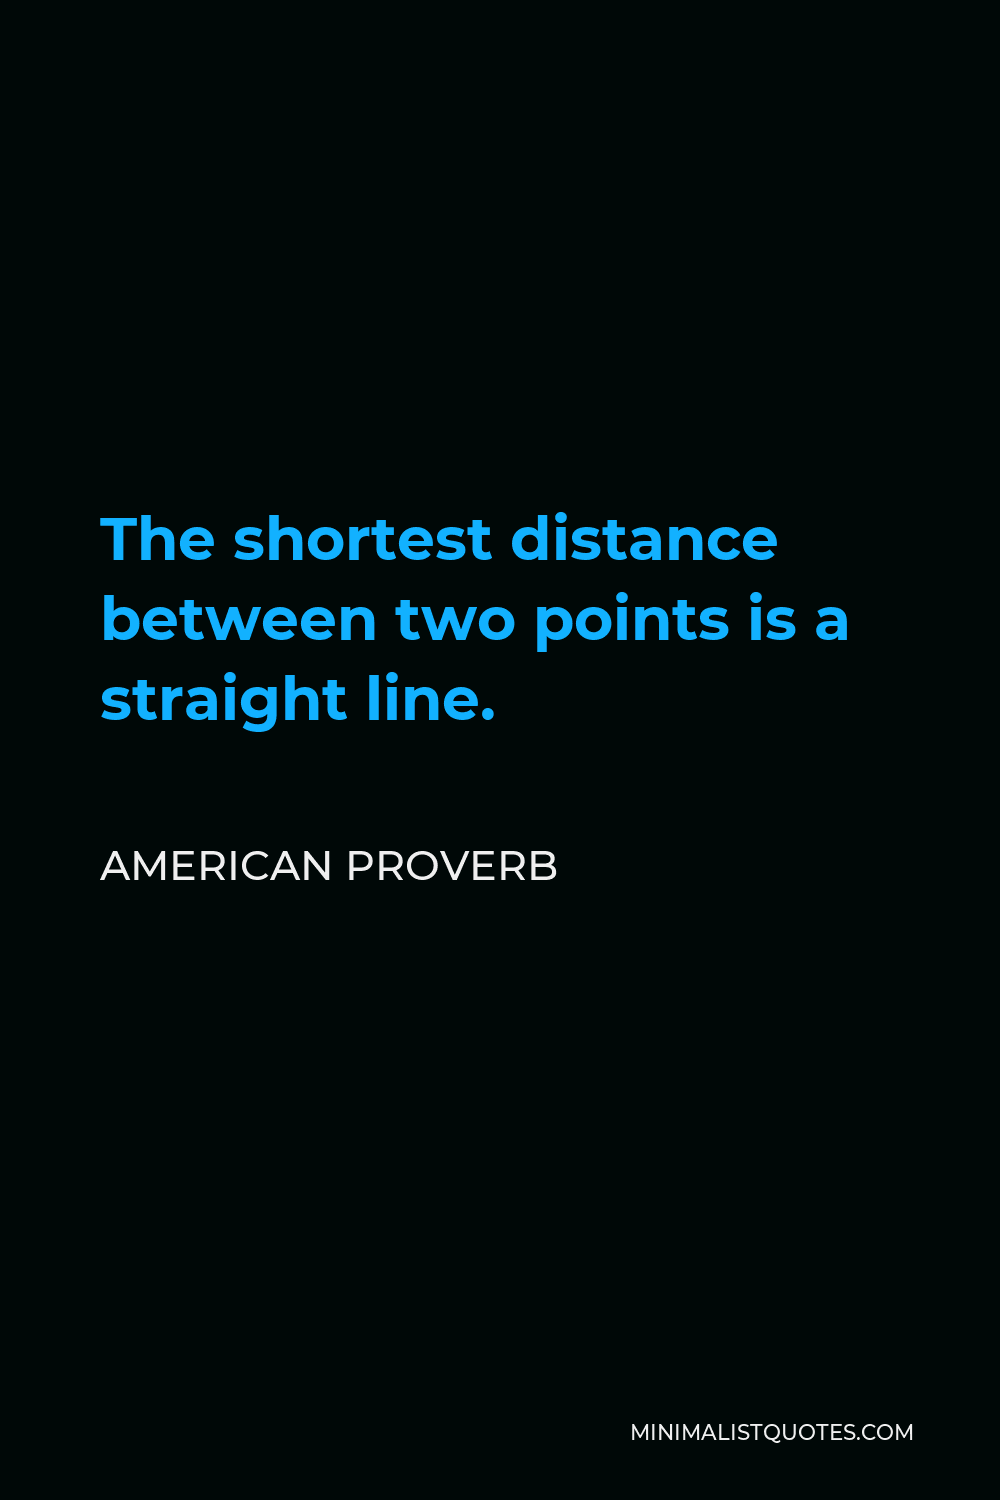 American Proverb Quote - The shortest distance between two points is a straight line.